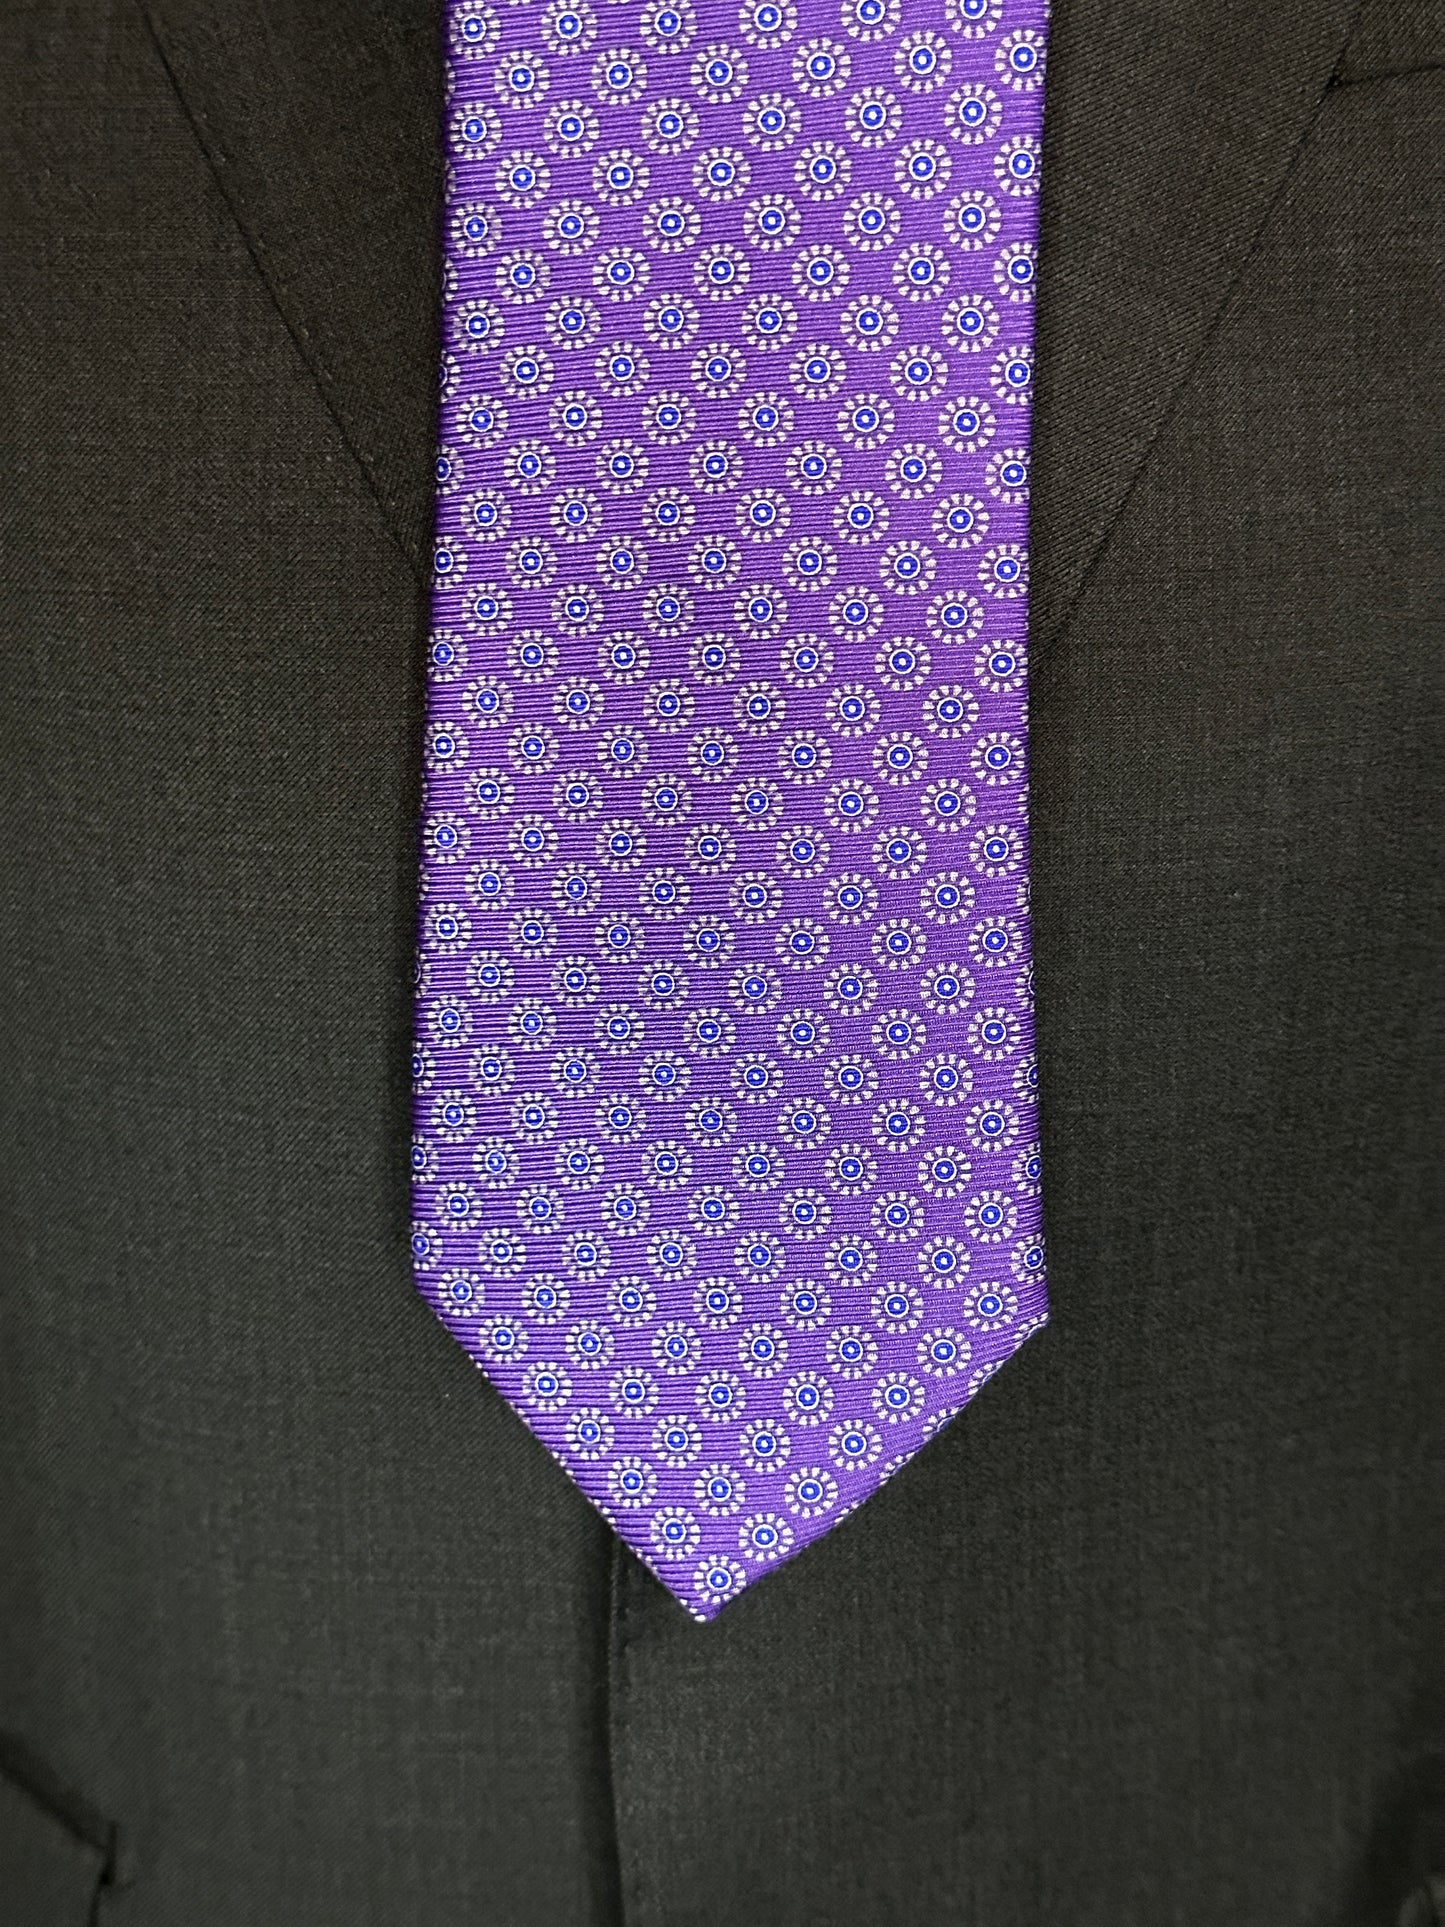 A beautiful light weight silk twill tie, perfect for those spring summer events on weekends and those special business meetings. The light purple or lavender color exudes luxurious and sophisticated elegance with any suit or jacket. Put this tie with a white shirt and navy blue blazer for a timeless look. 